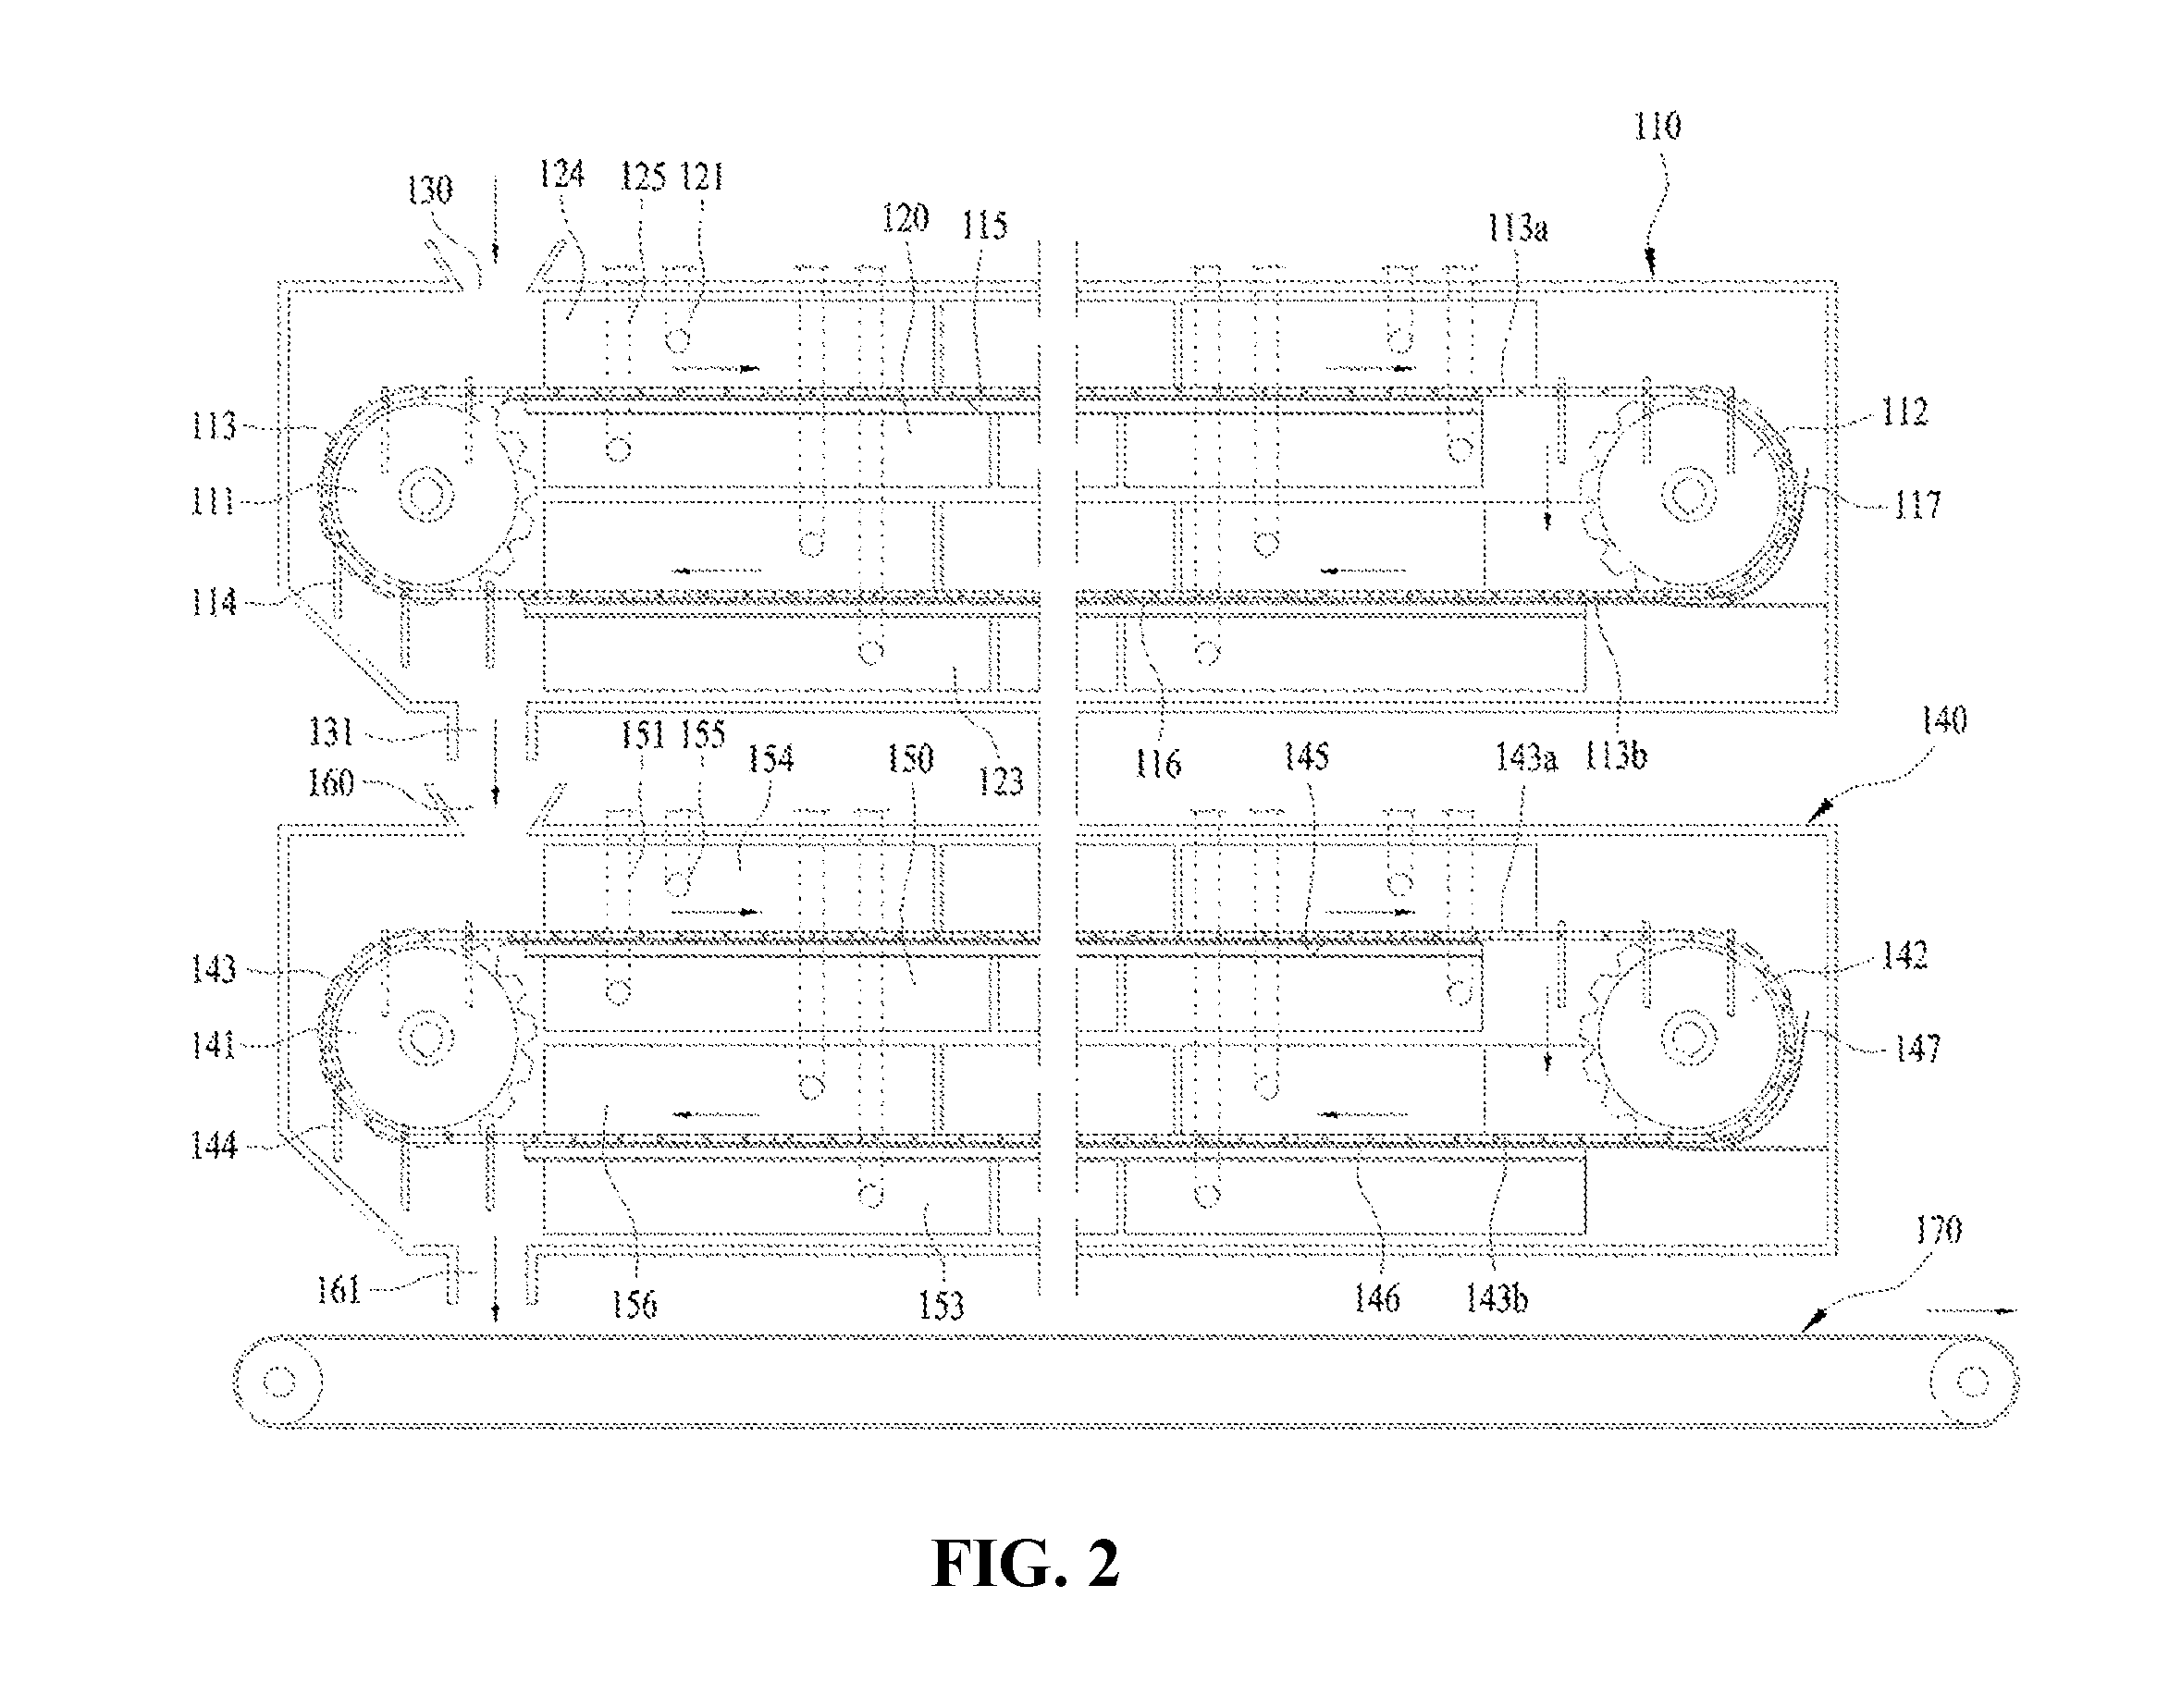 Apparatus for drying coal using reheat steam